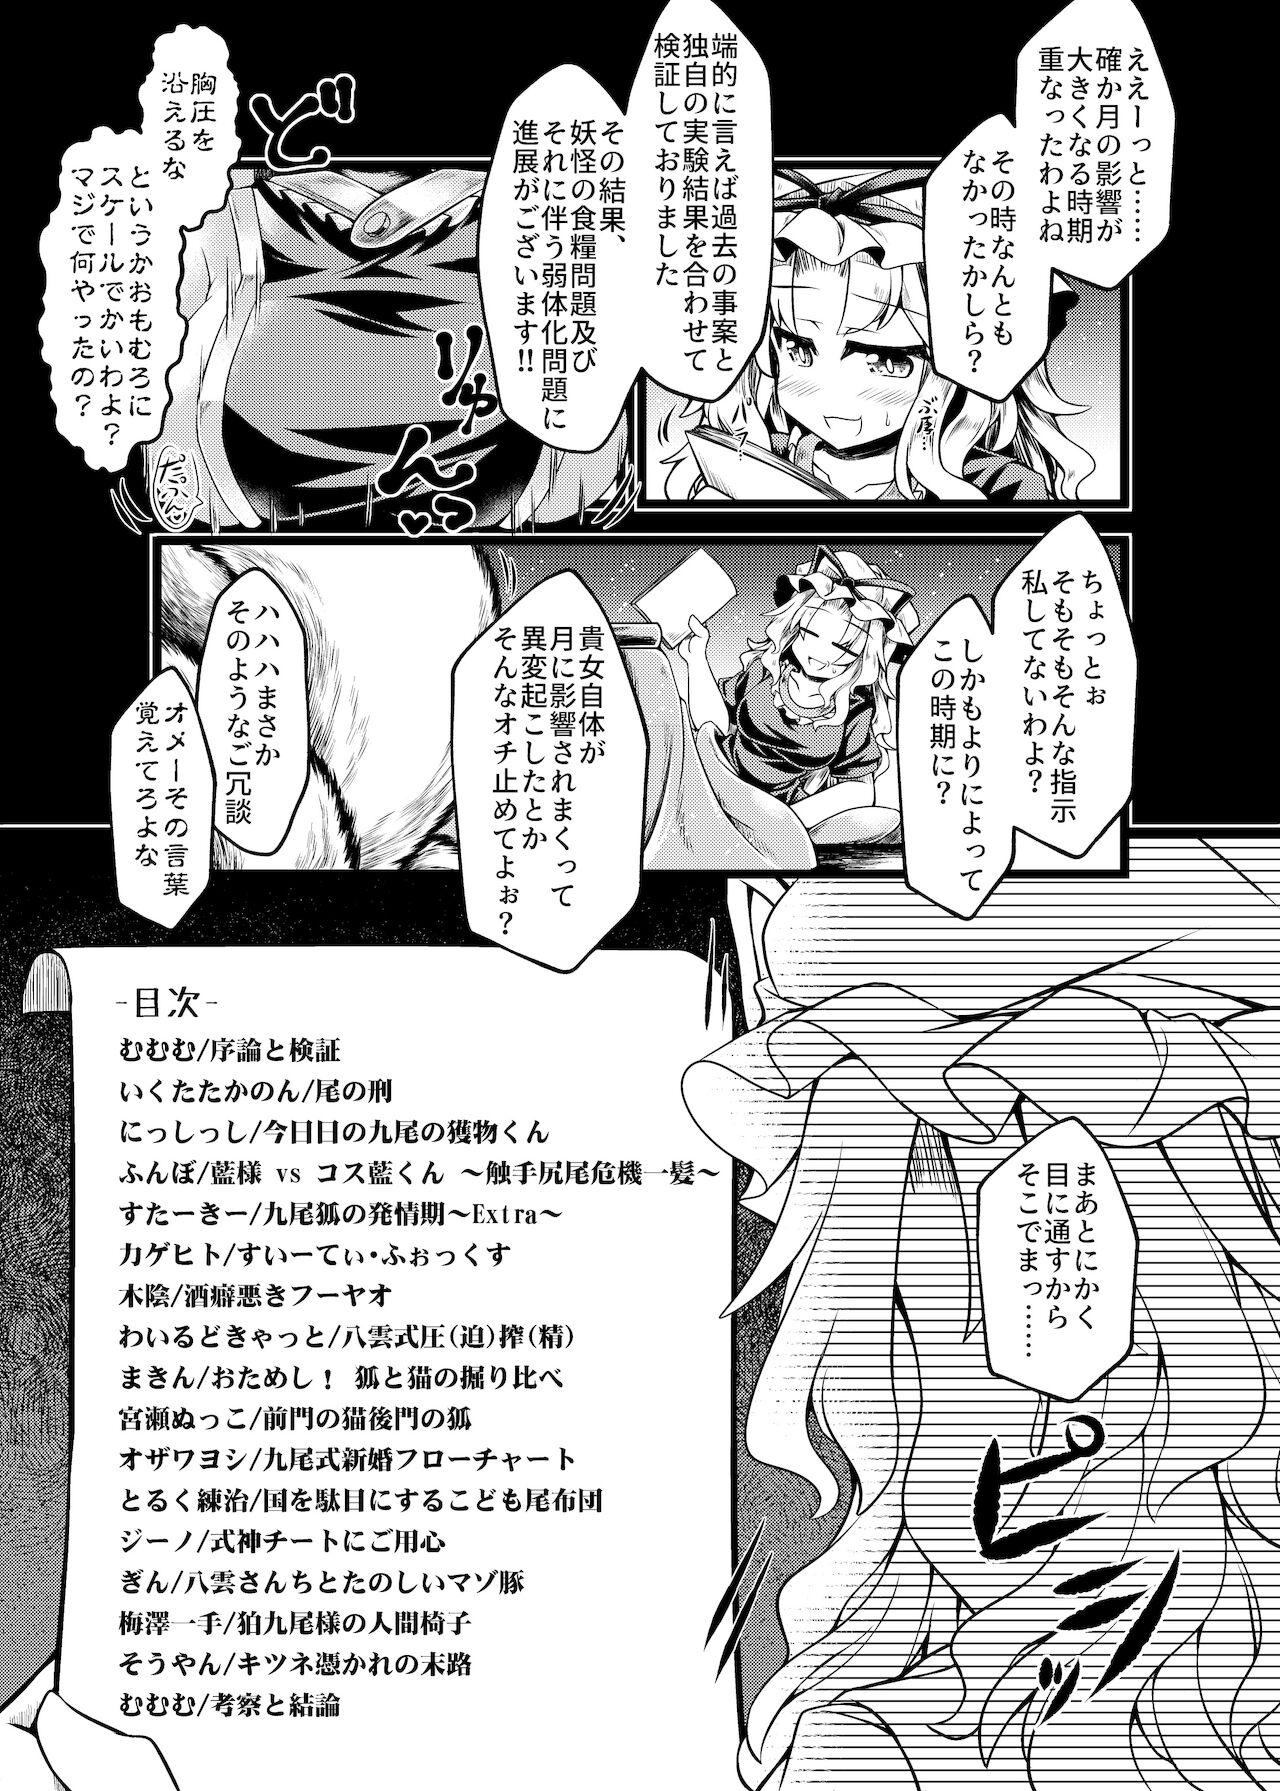 Tight Ass 嫐九尾の搾精報告 - Touhou project Freak - Page 5